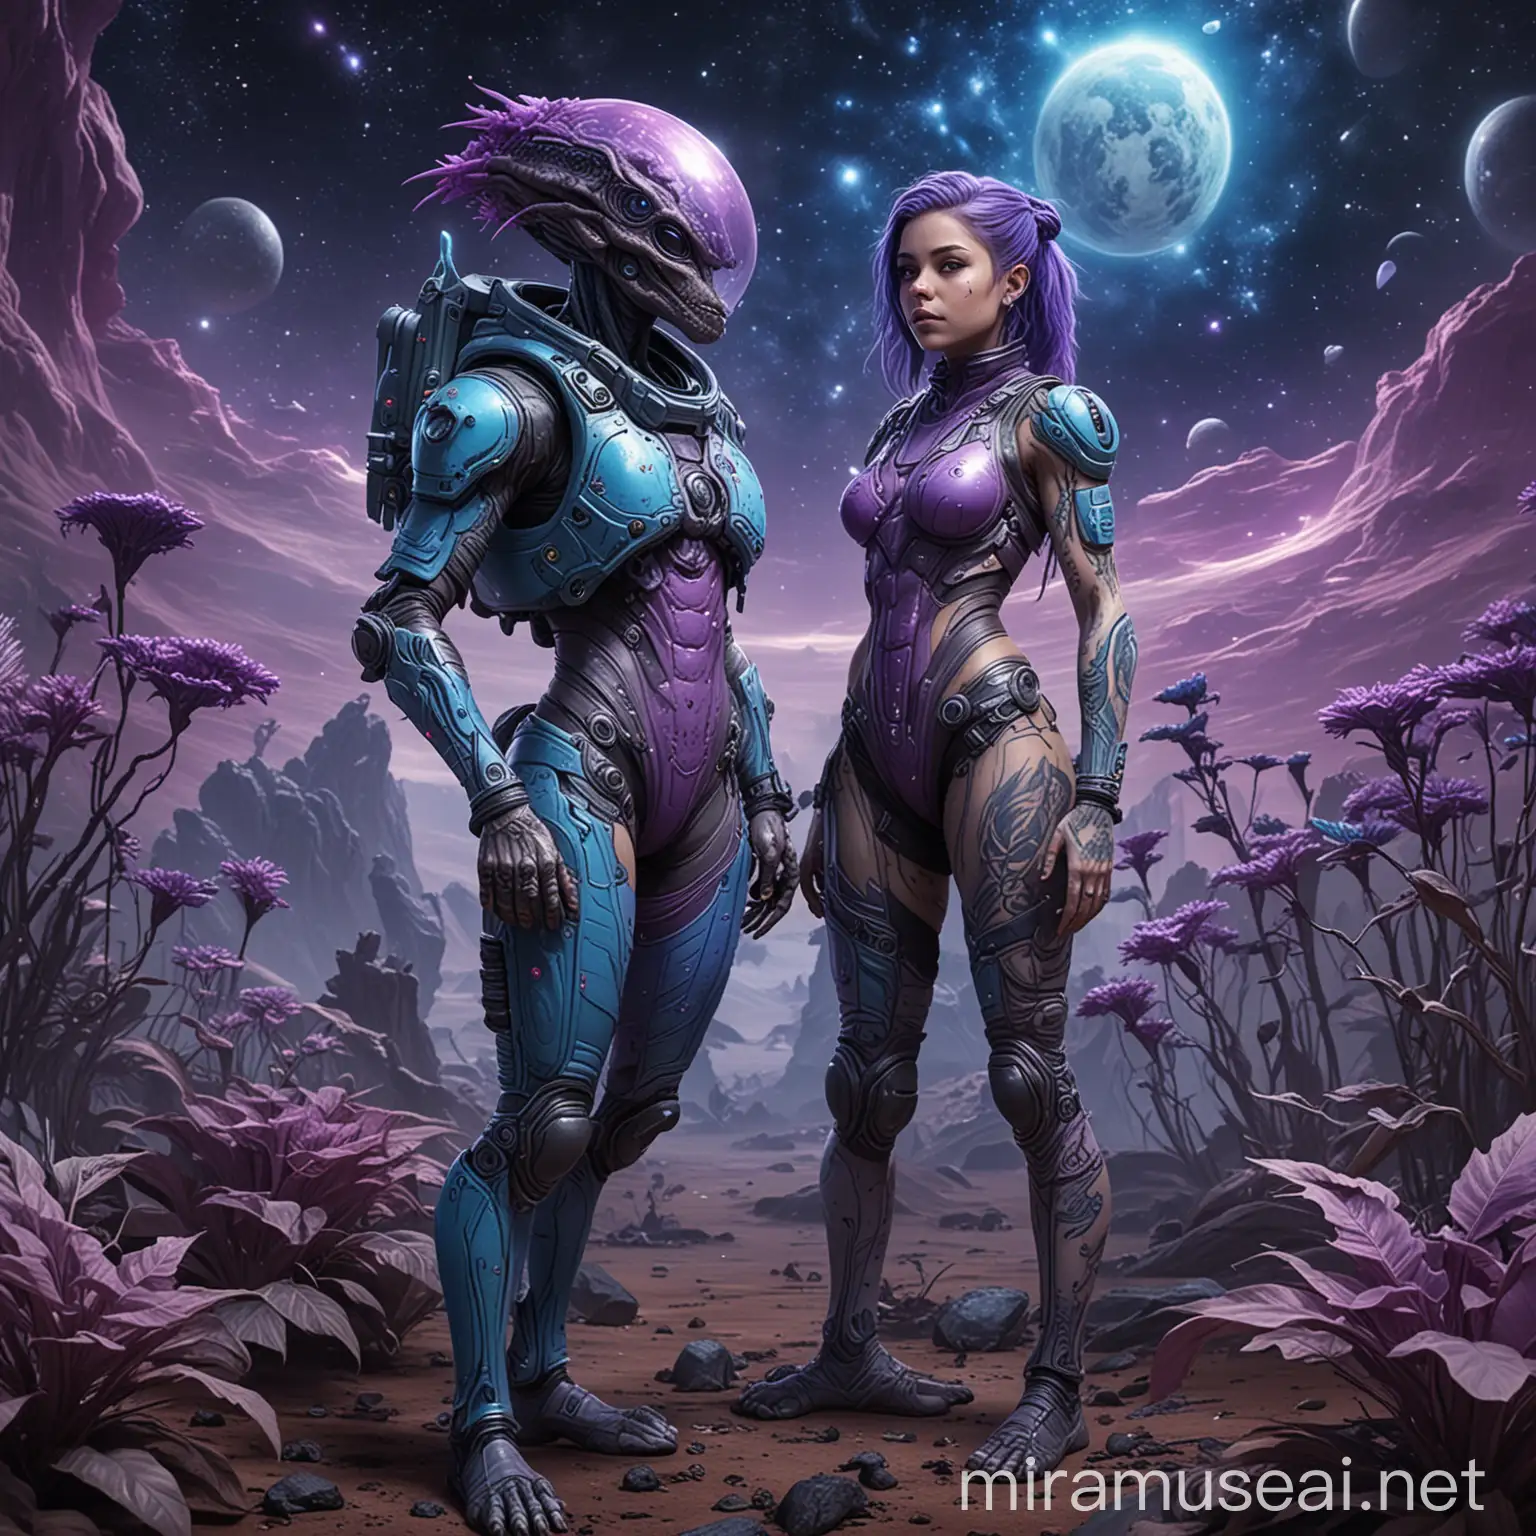 female scout on an alien planet in tight purple and blue space gear, tattoos, adoring a cute grey and blue creature, alien planet with odd plants, full body